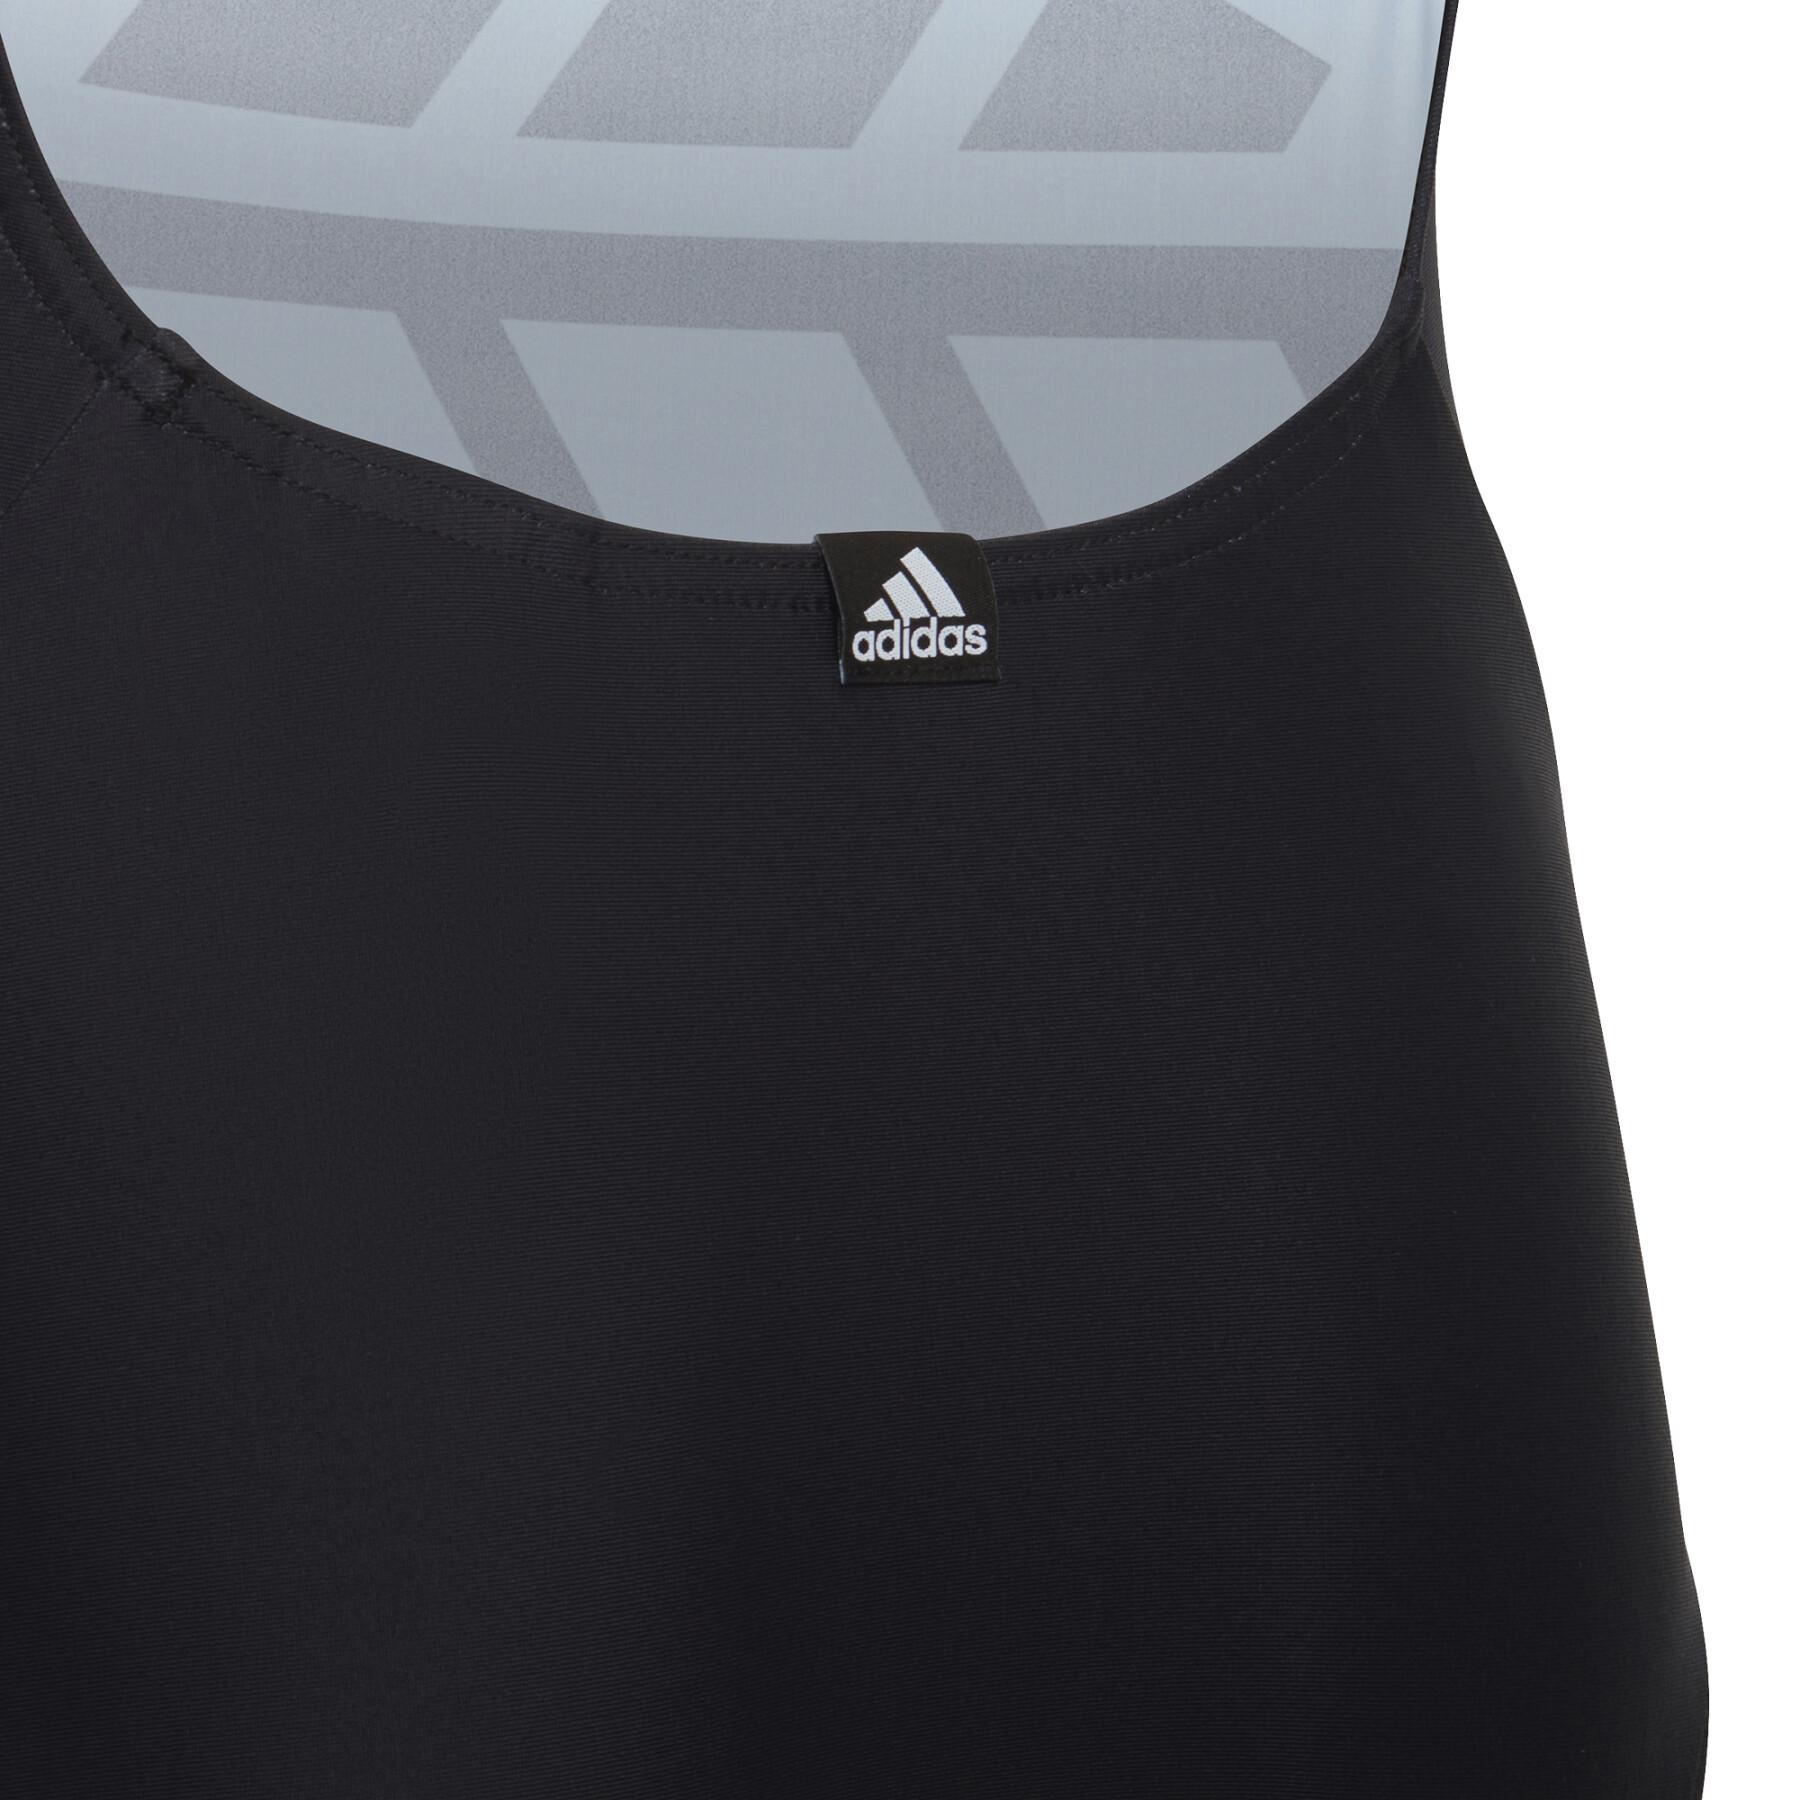 Maillot de bain fille adidas Girls Must Have